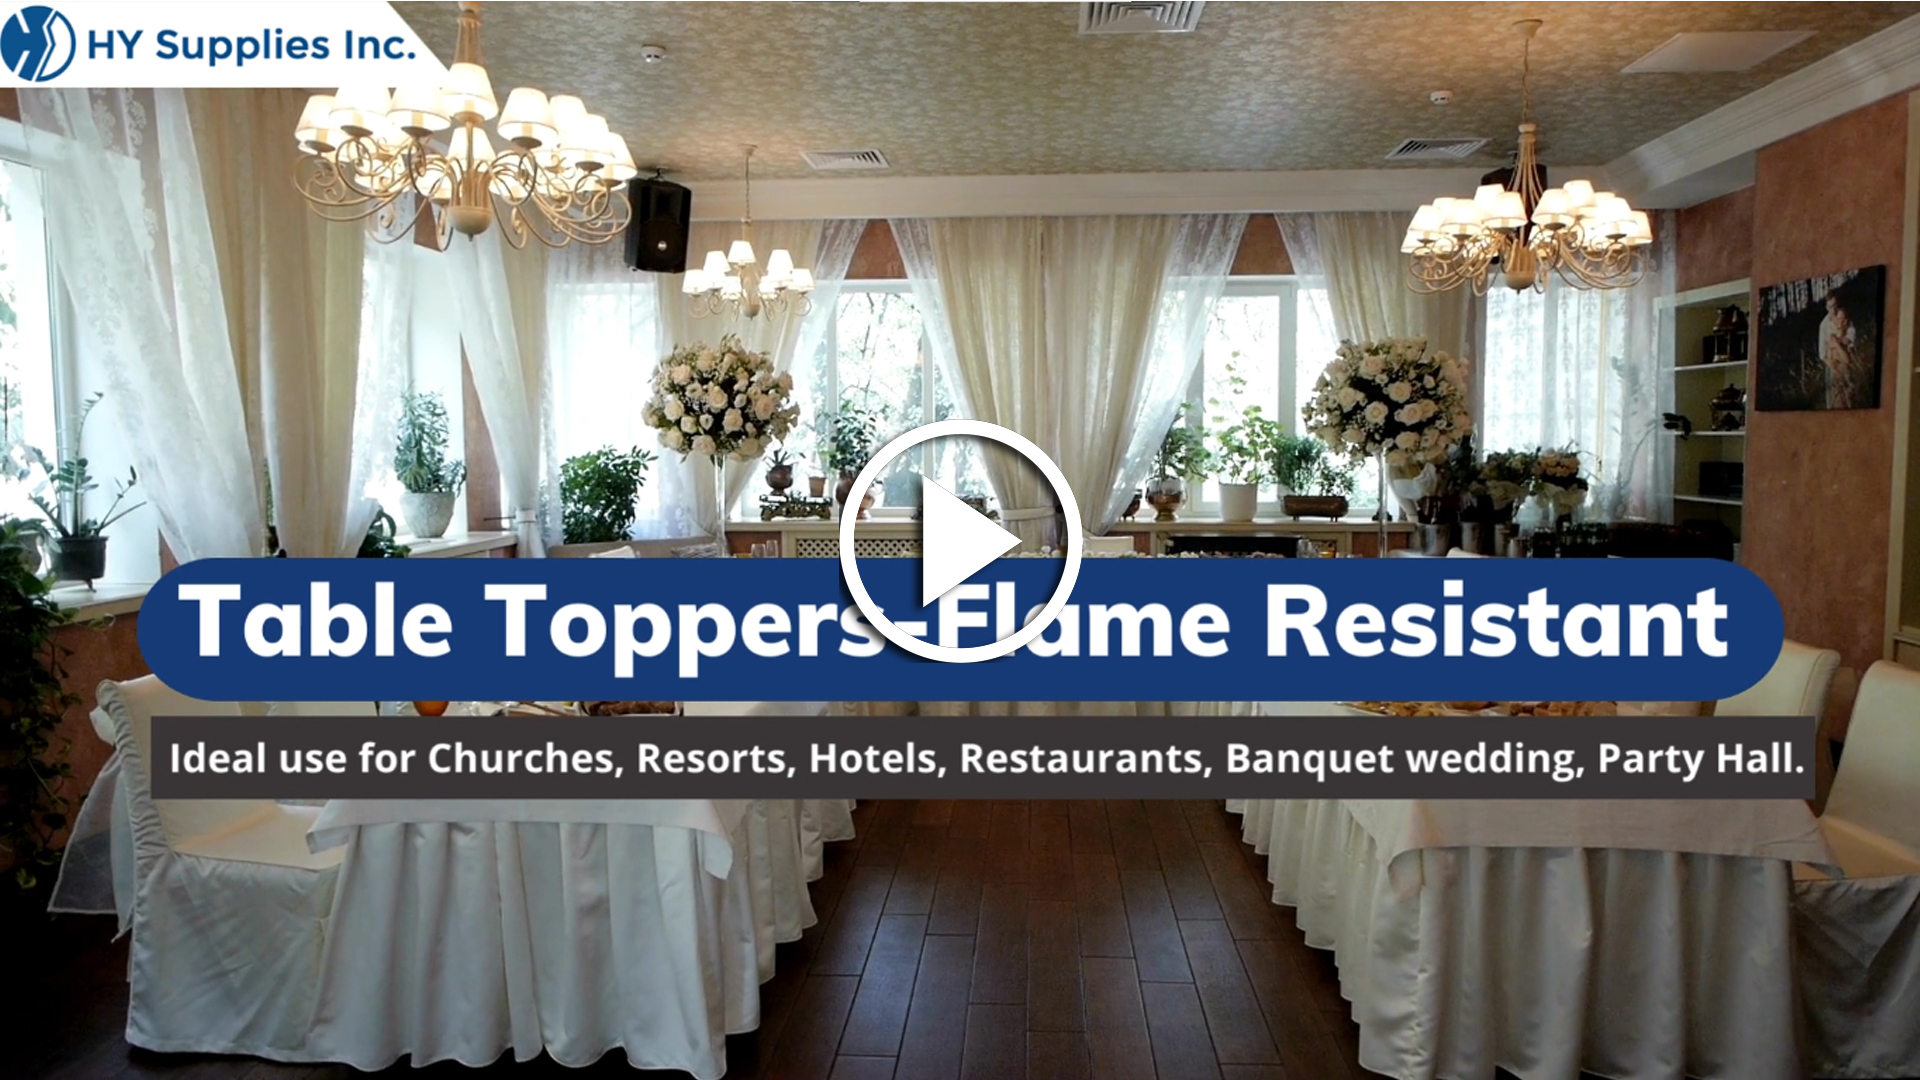 Table Toppers-Flame Resistant